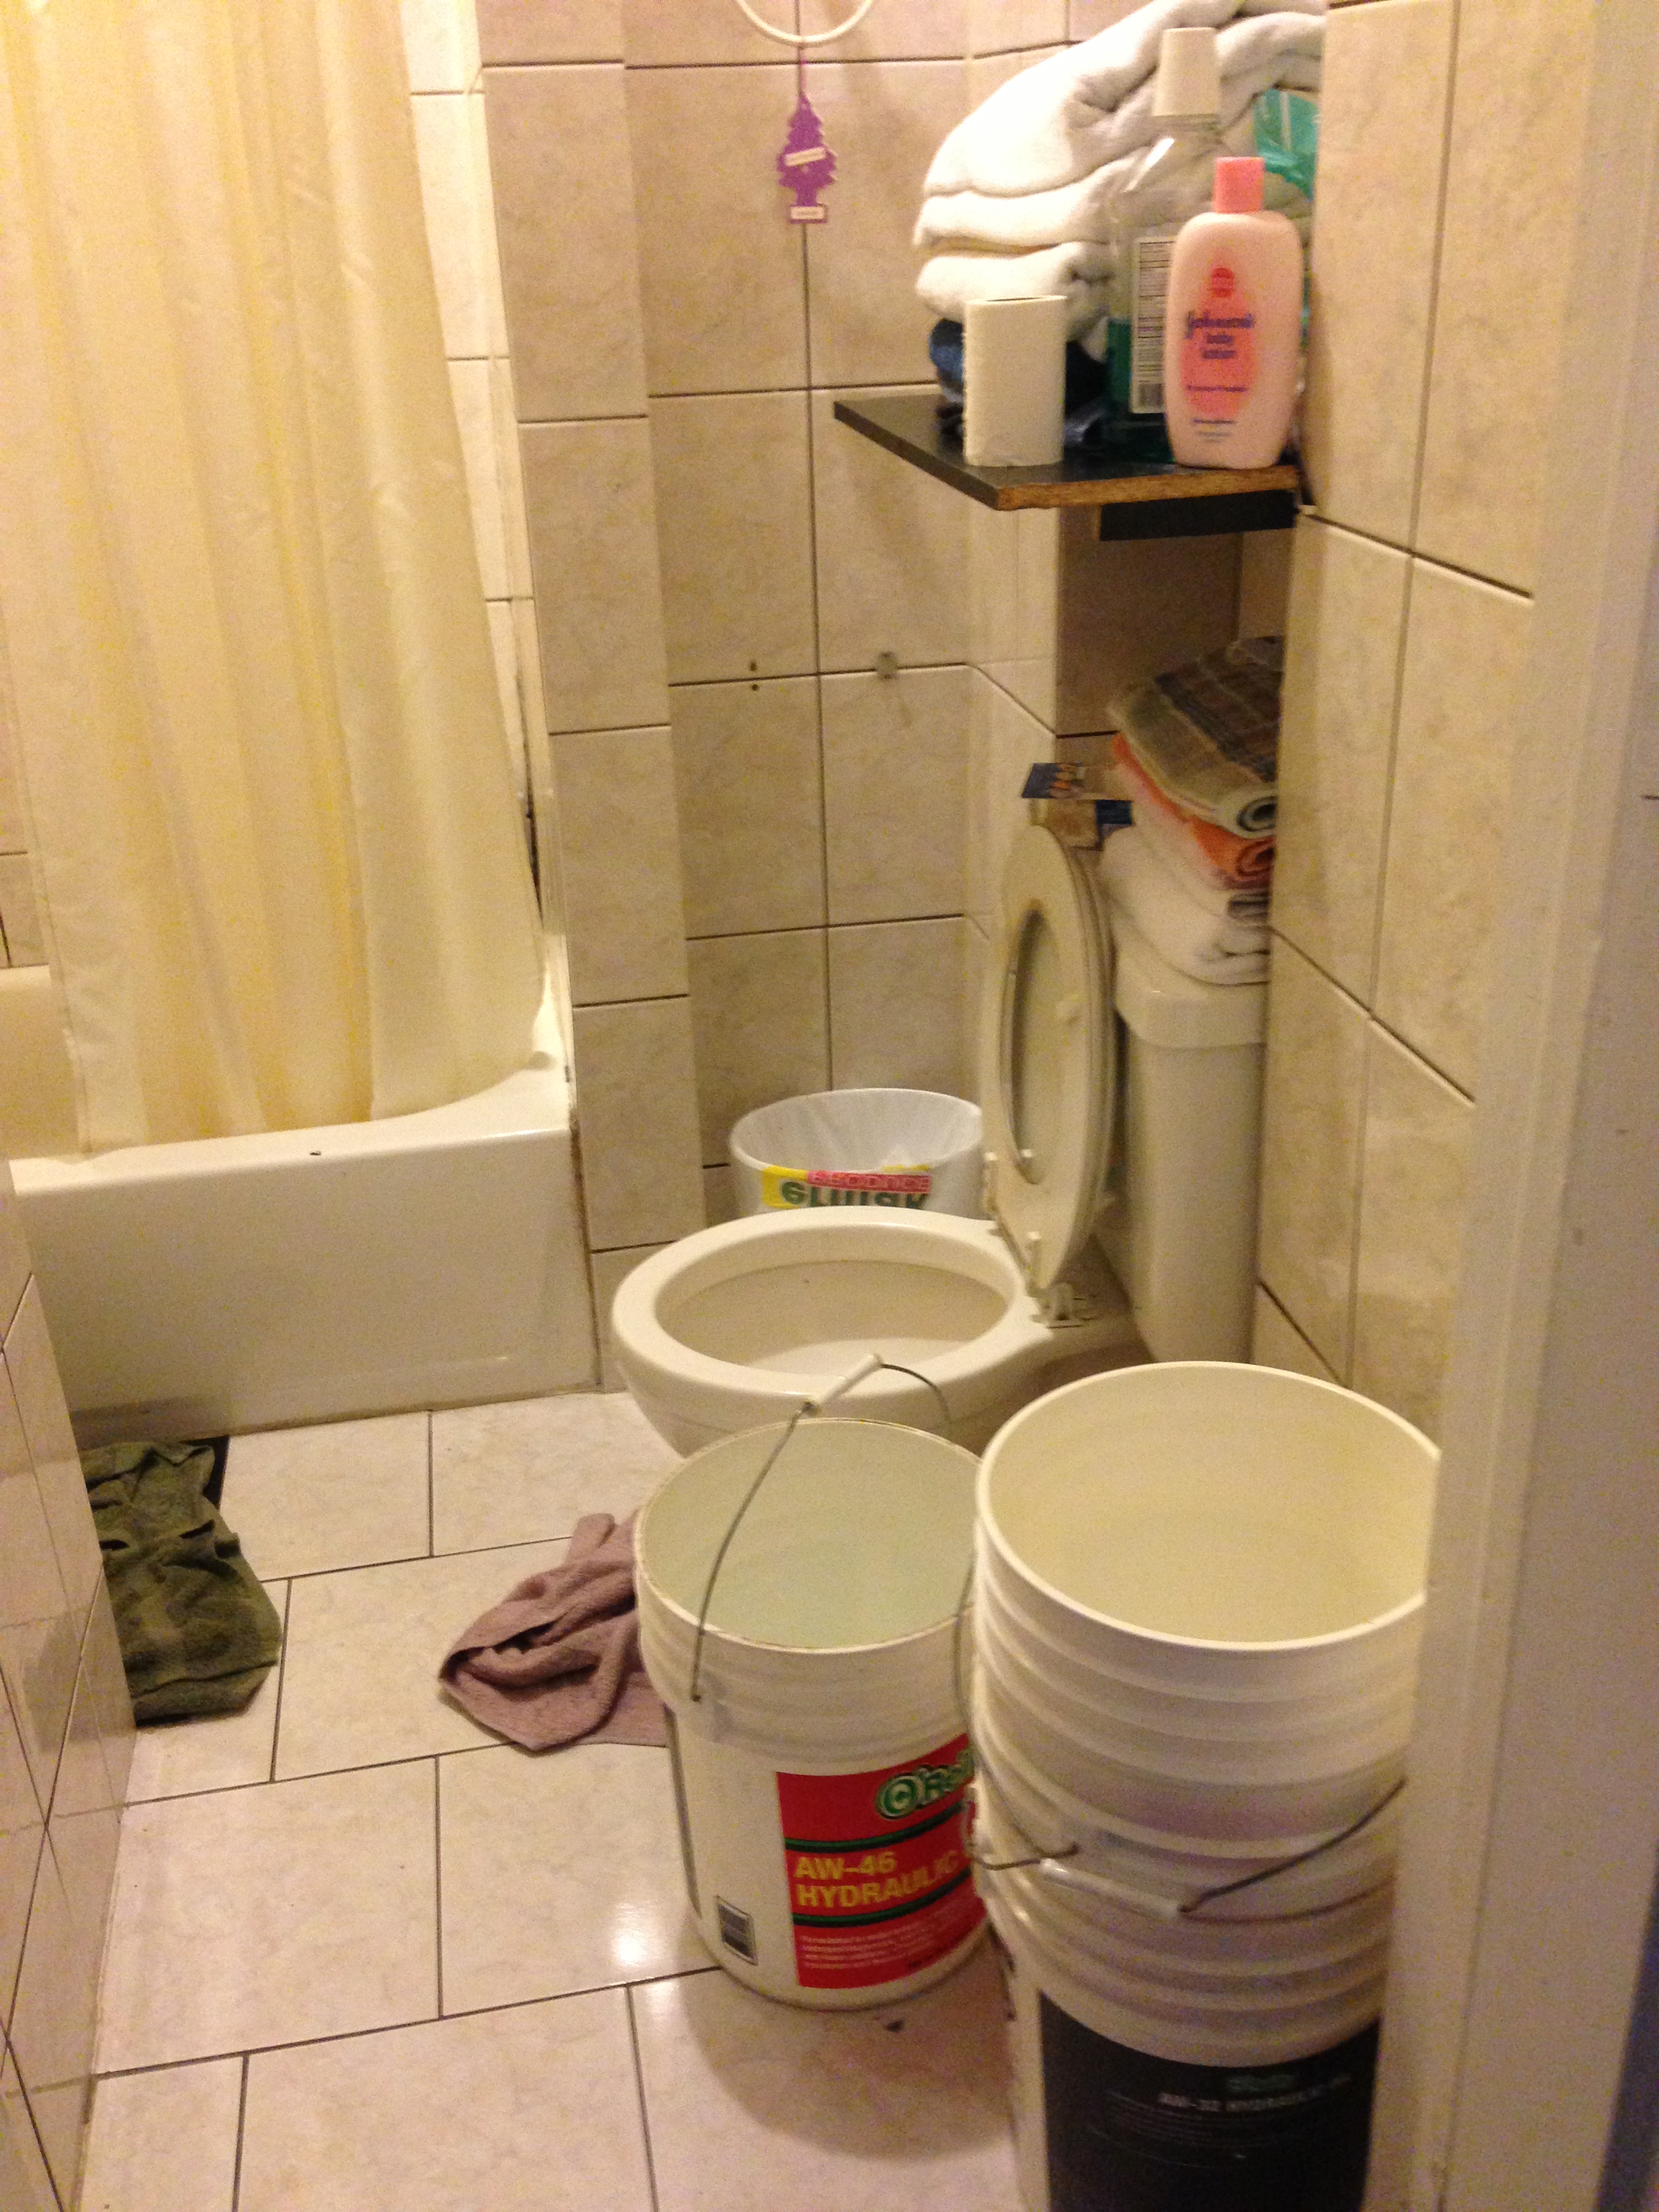 Tenants Had to use buckets to flush the toilet and for bathing. (Credit: Steve Miller)